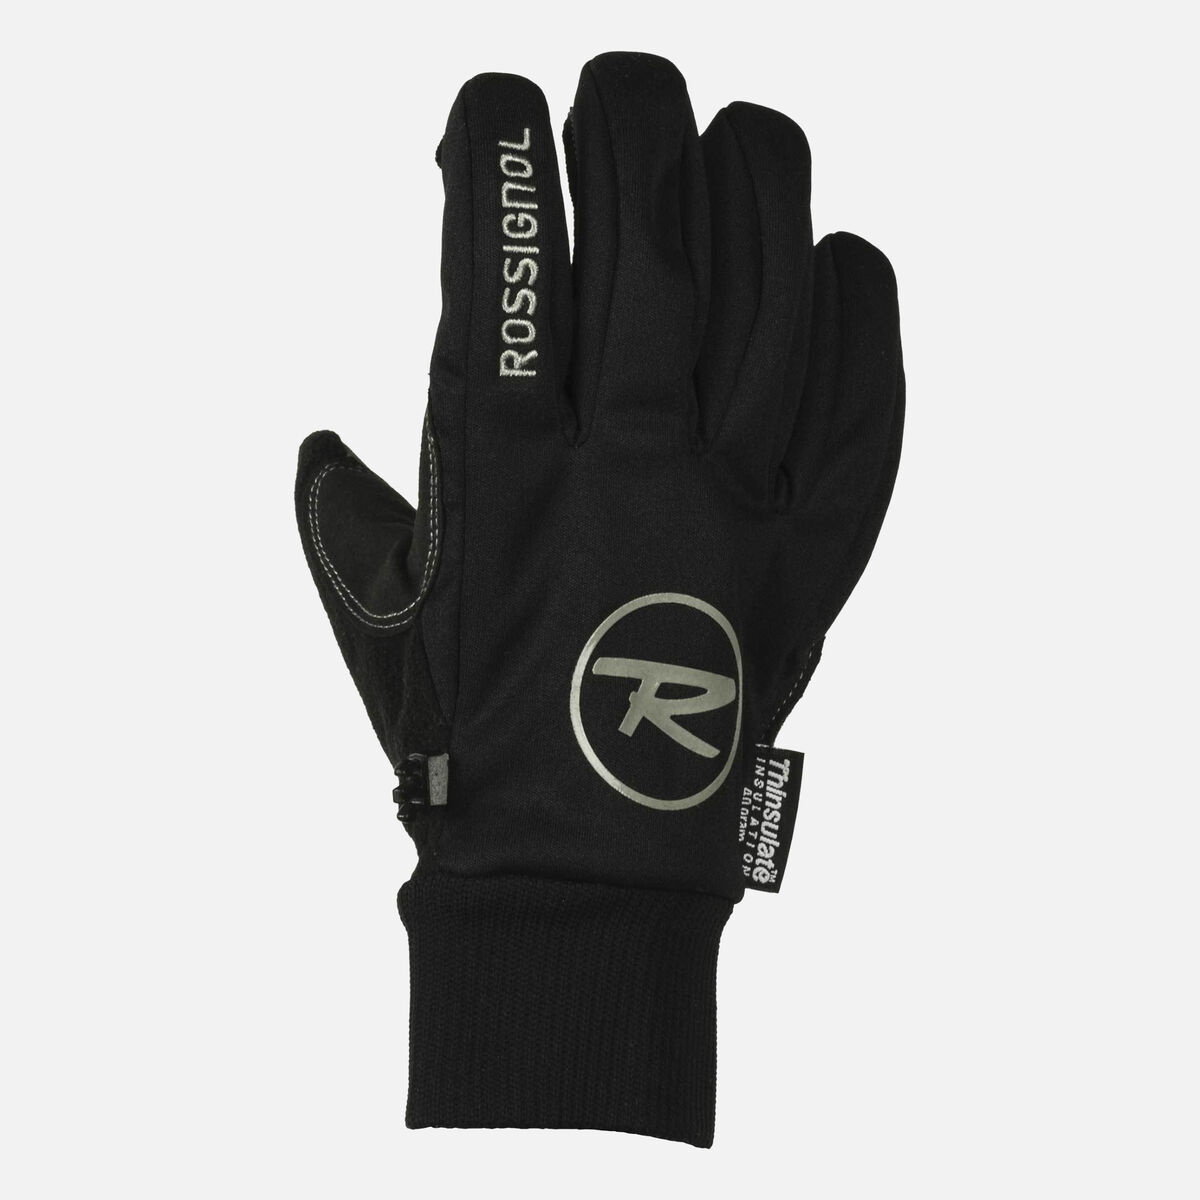 PUMP FIST THERMO GLV BLK/DKGRY